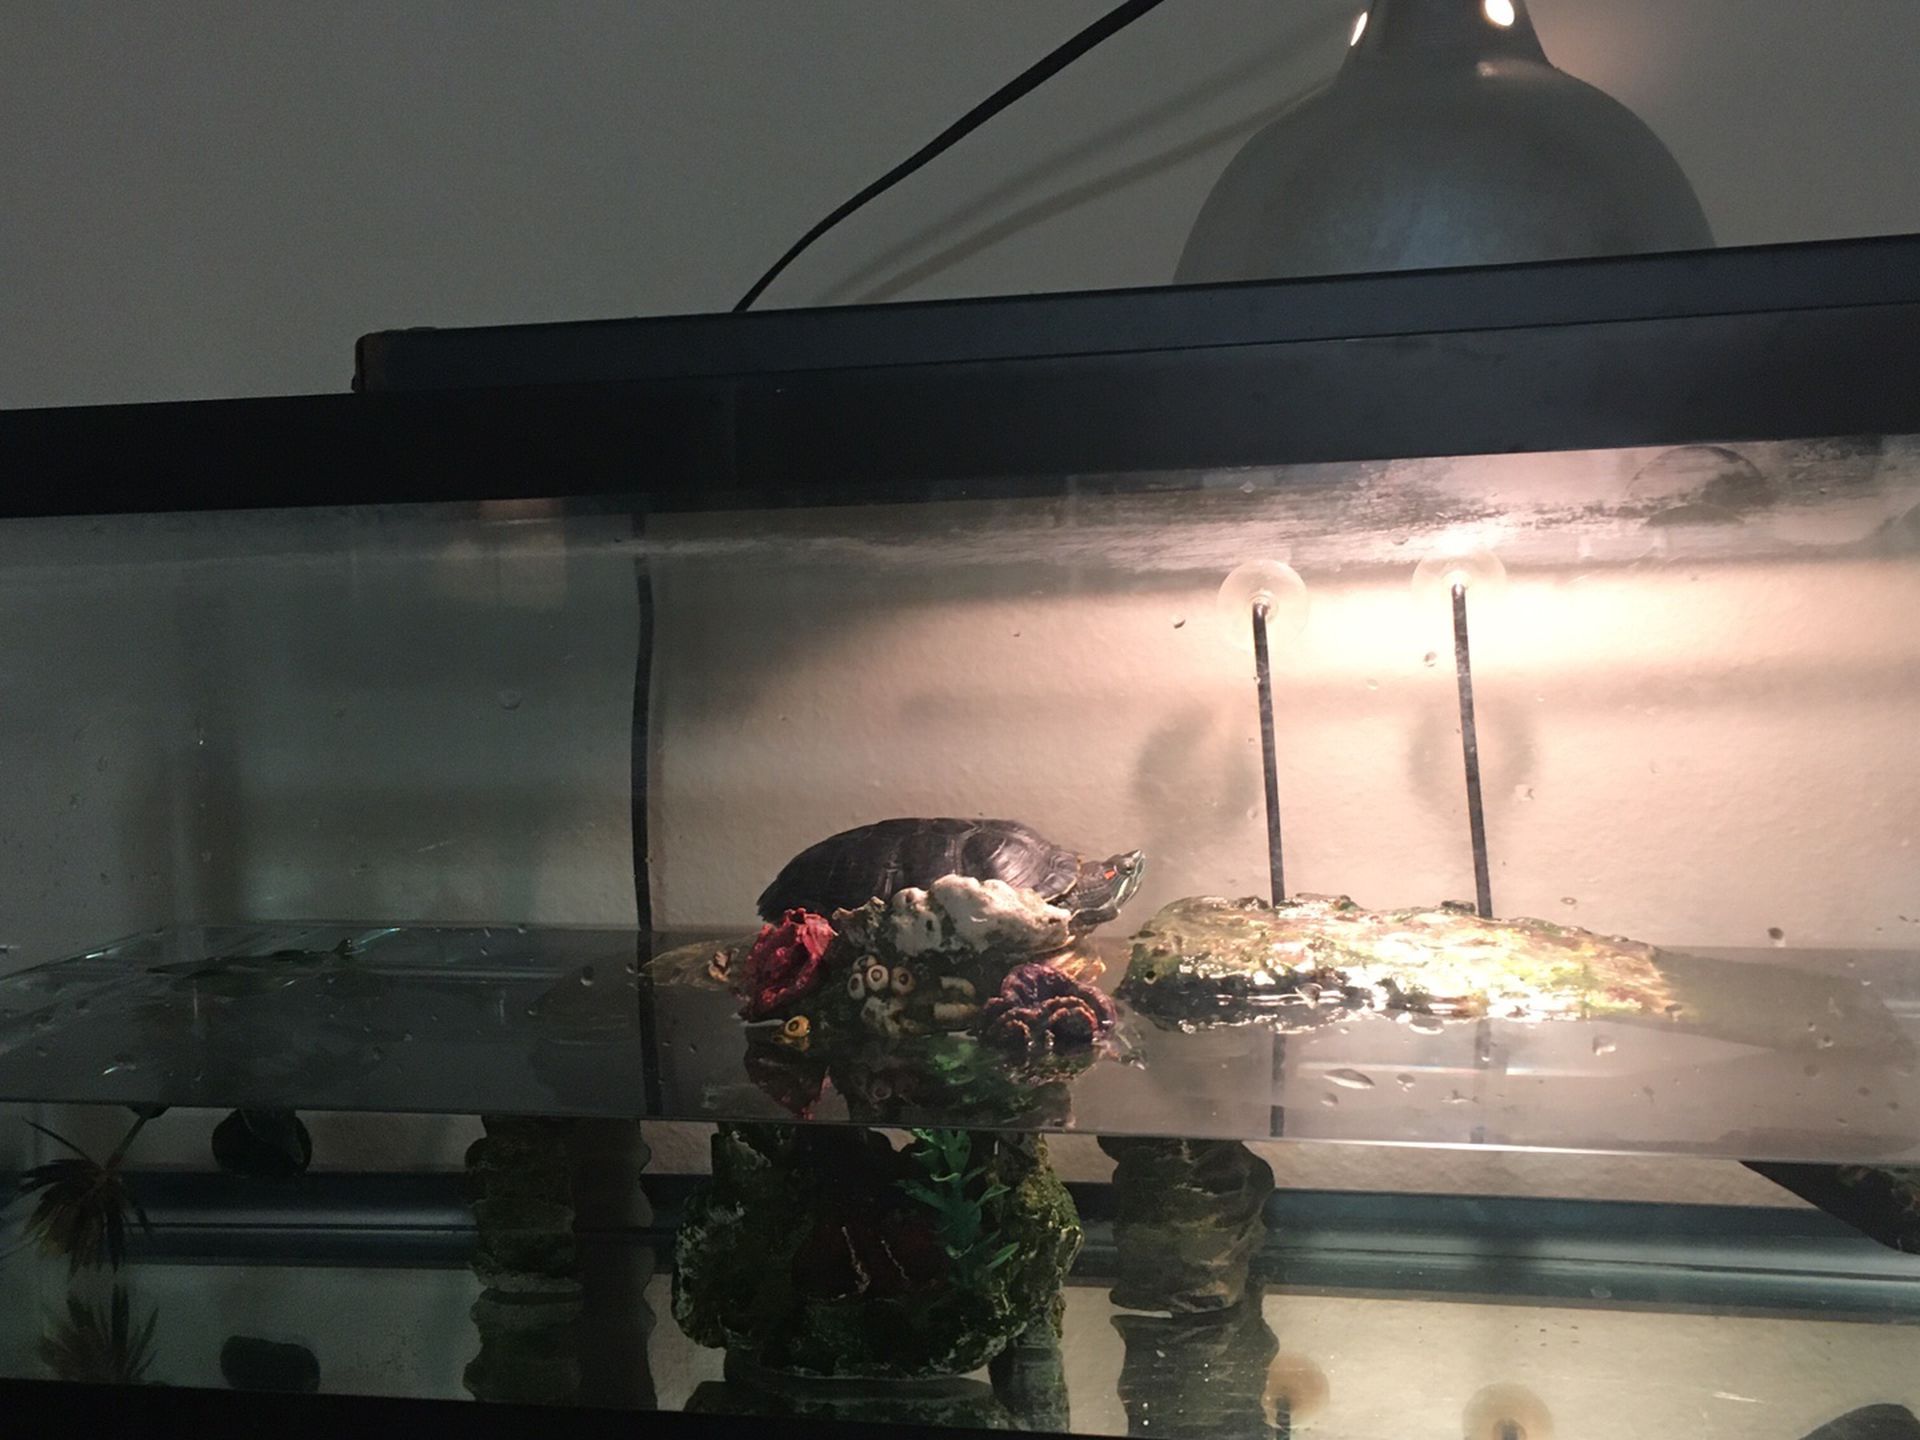 Turtle Tank (20 Gallon) with Red Eared Slider, Auto Heat Lamp, Auto Feeder, and Accessories